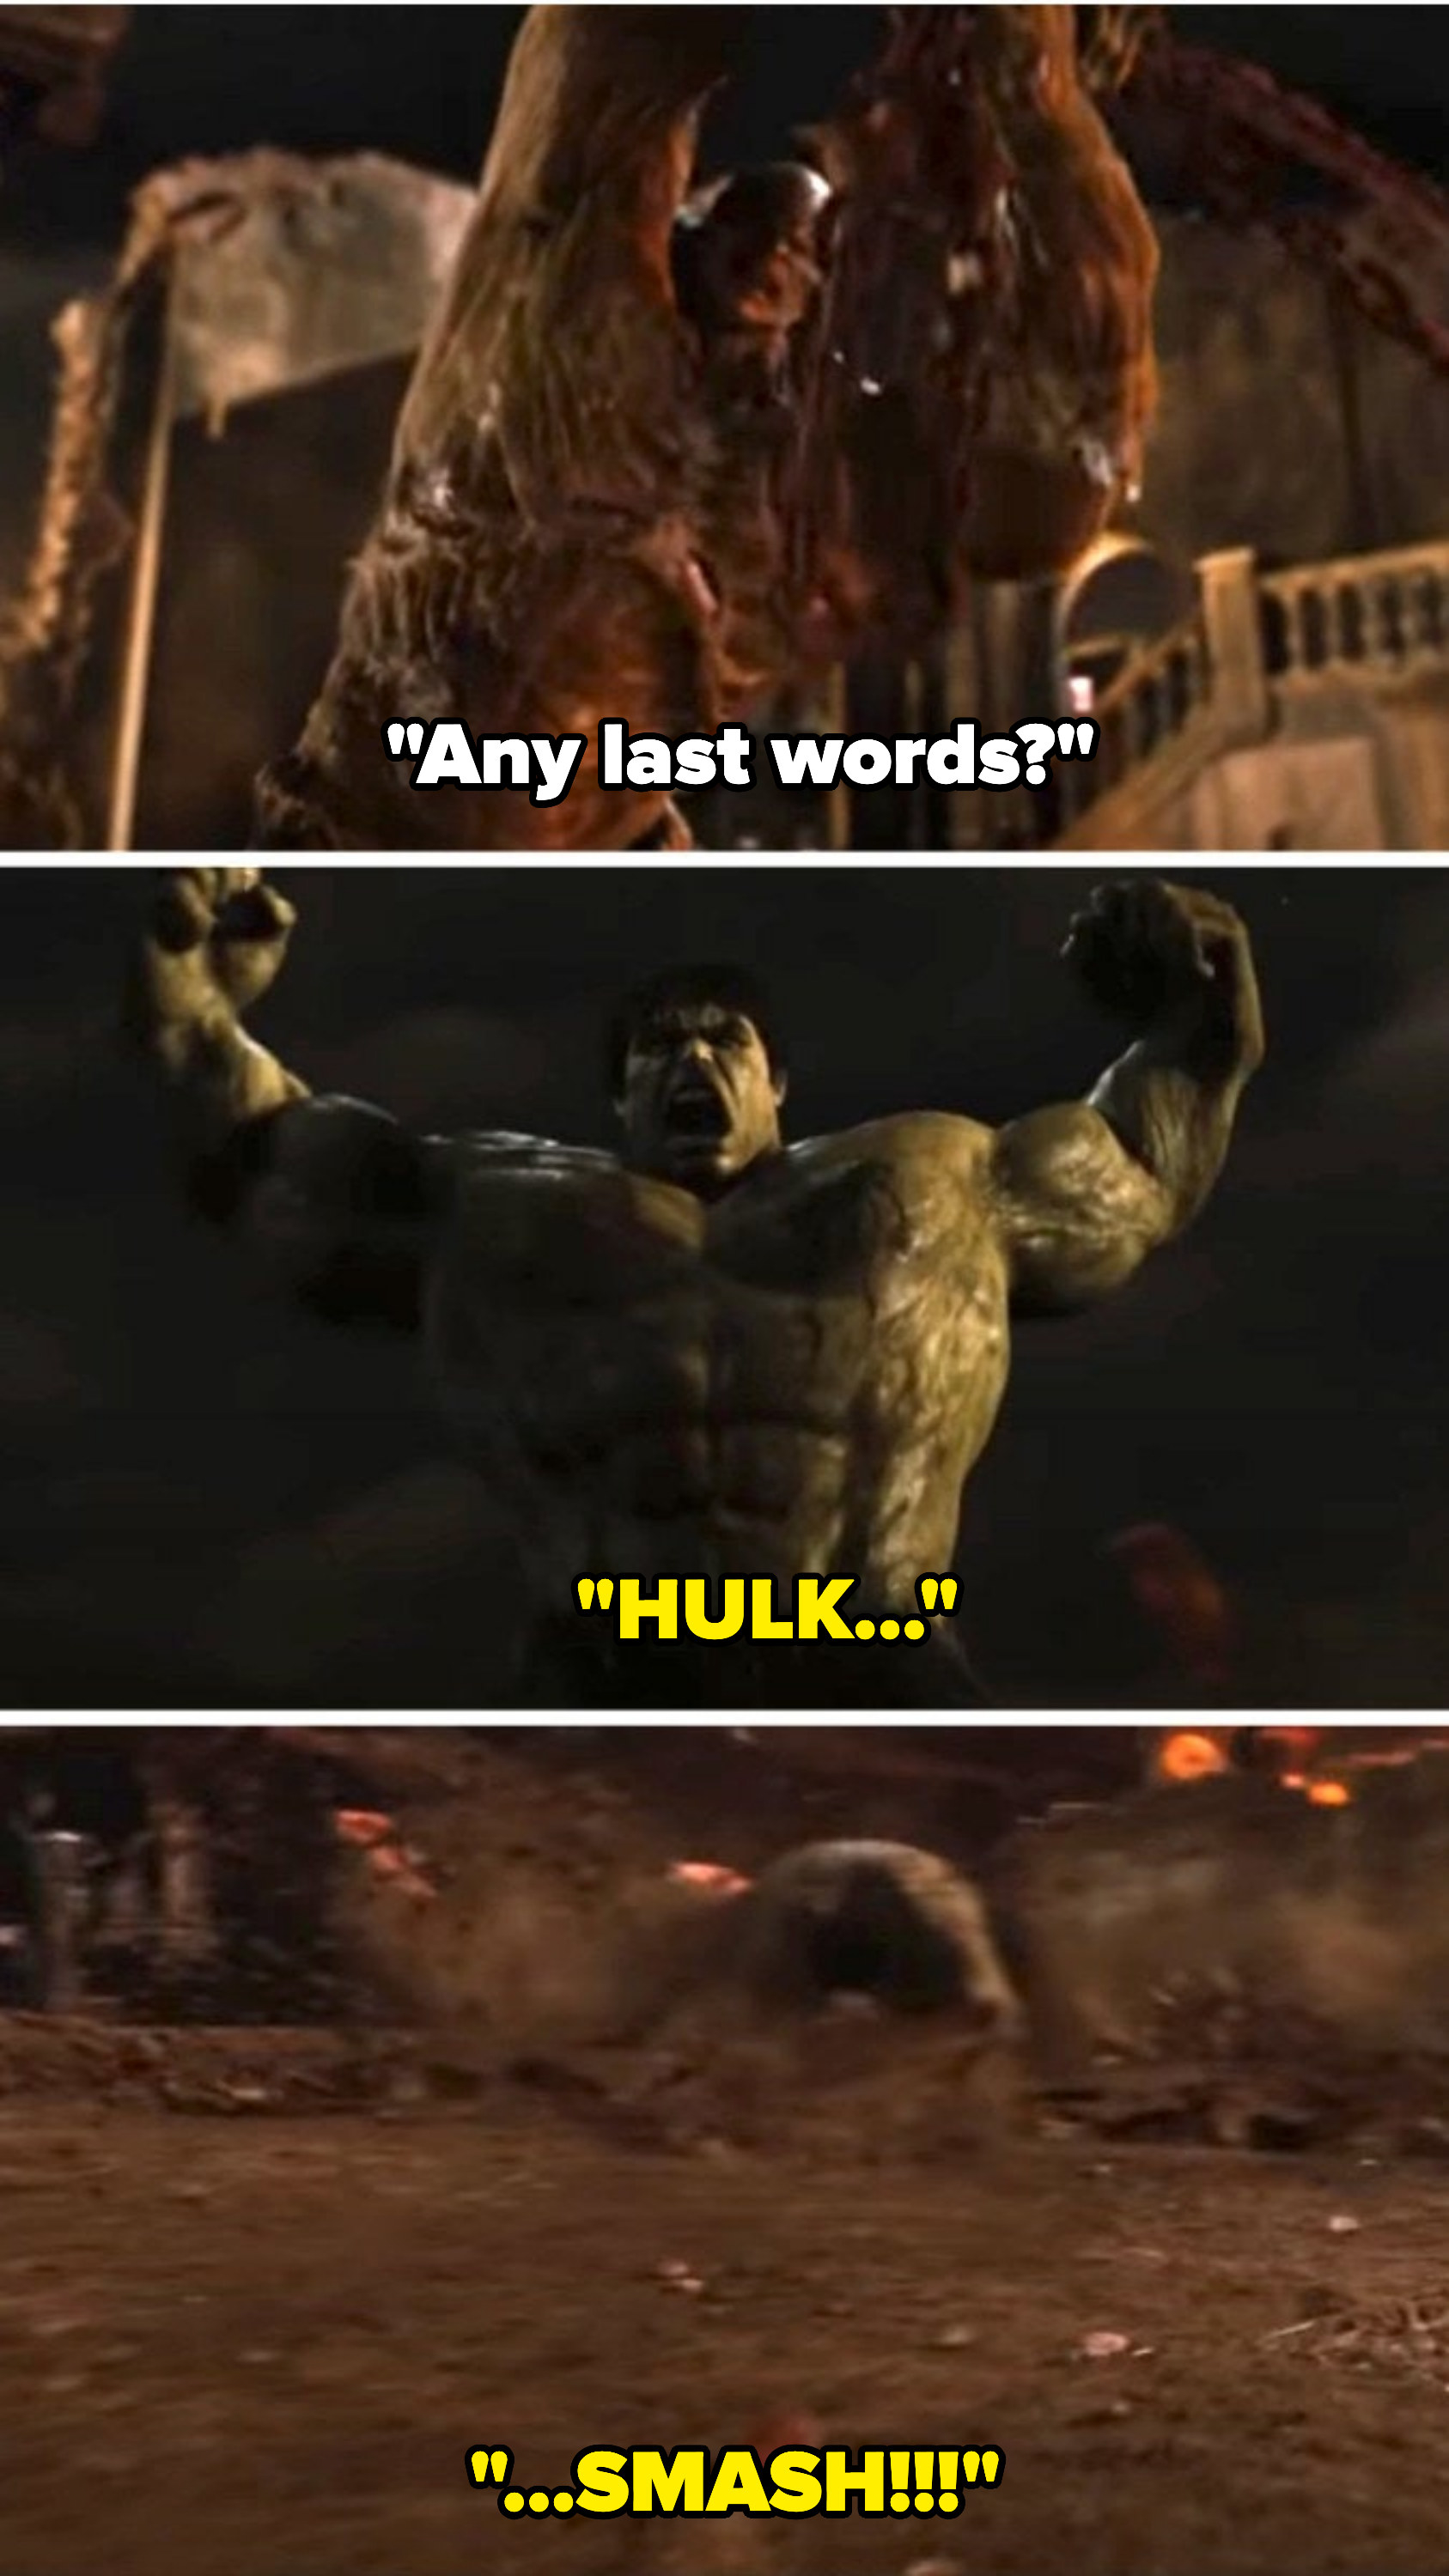 Abomination says &quot;any last words&quot; and hulk says &quot;hulk smash&quot; and hits the ground